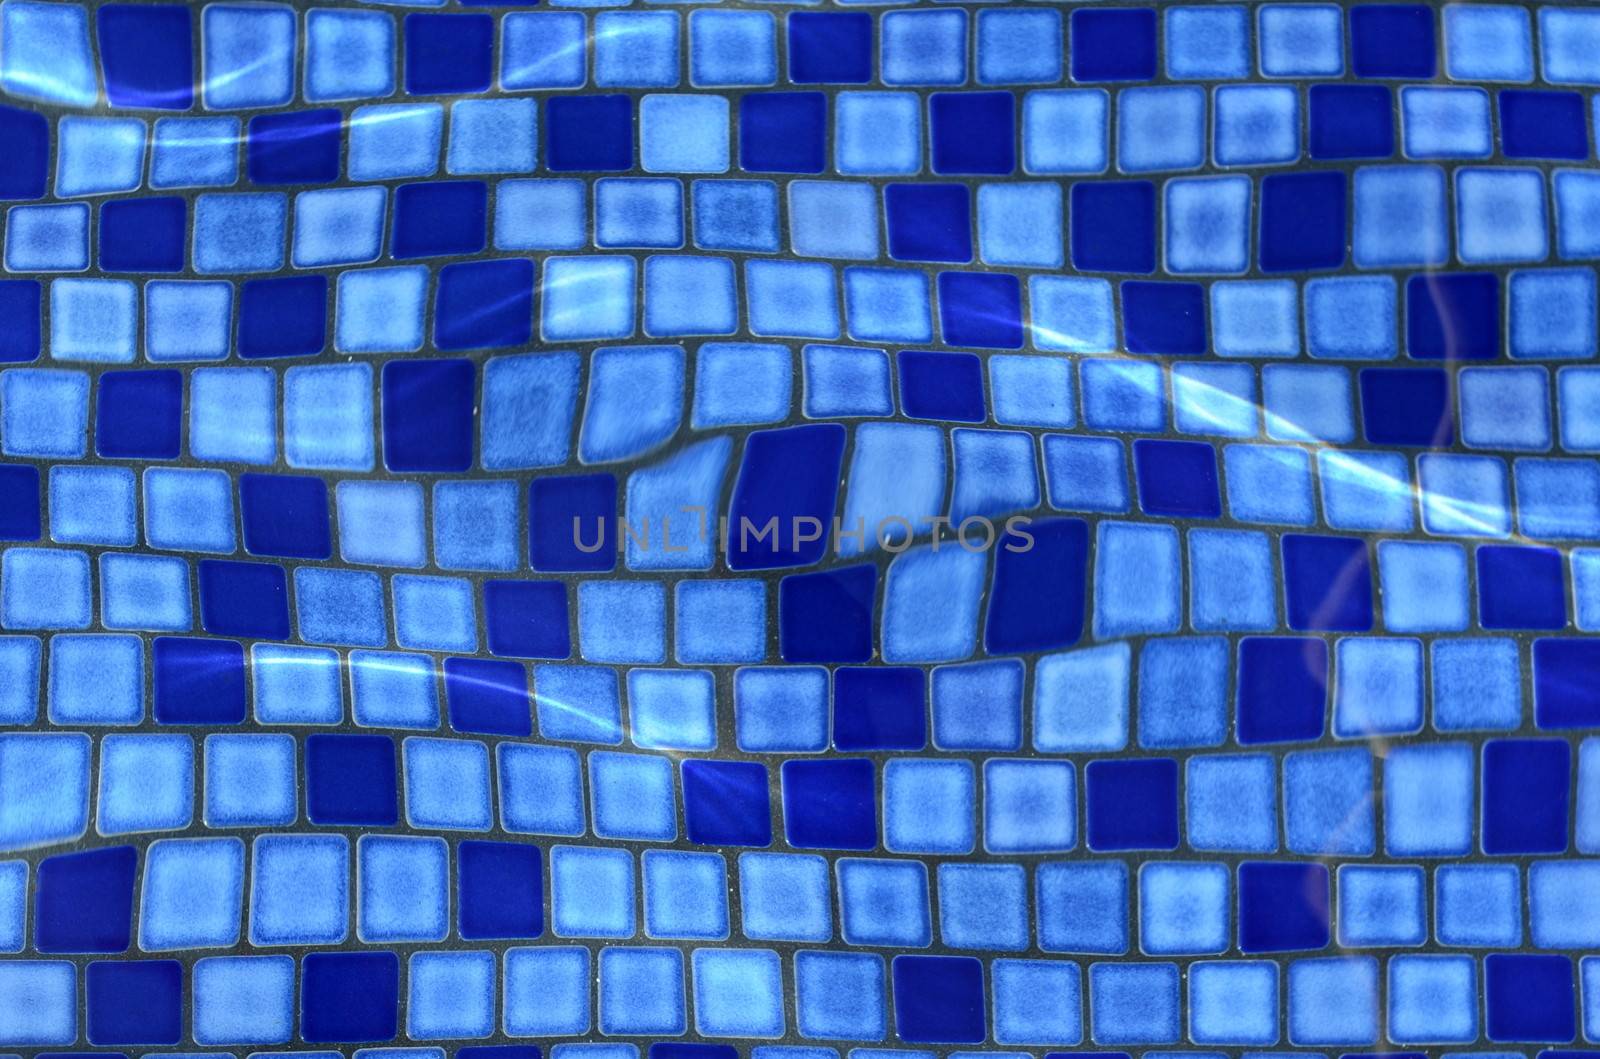 Abstract Background Texture Of Vacation Image Of Swimming Pool Tiles